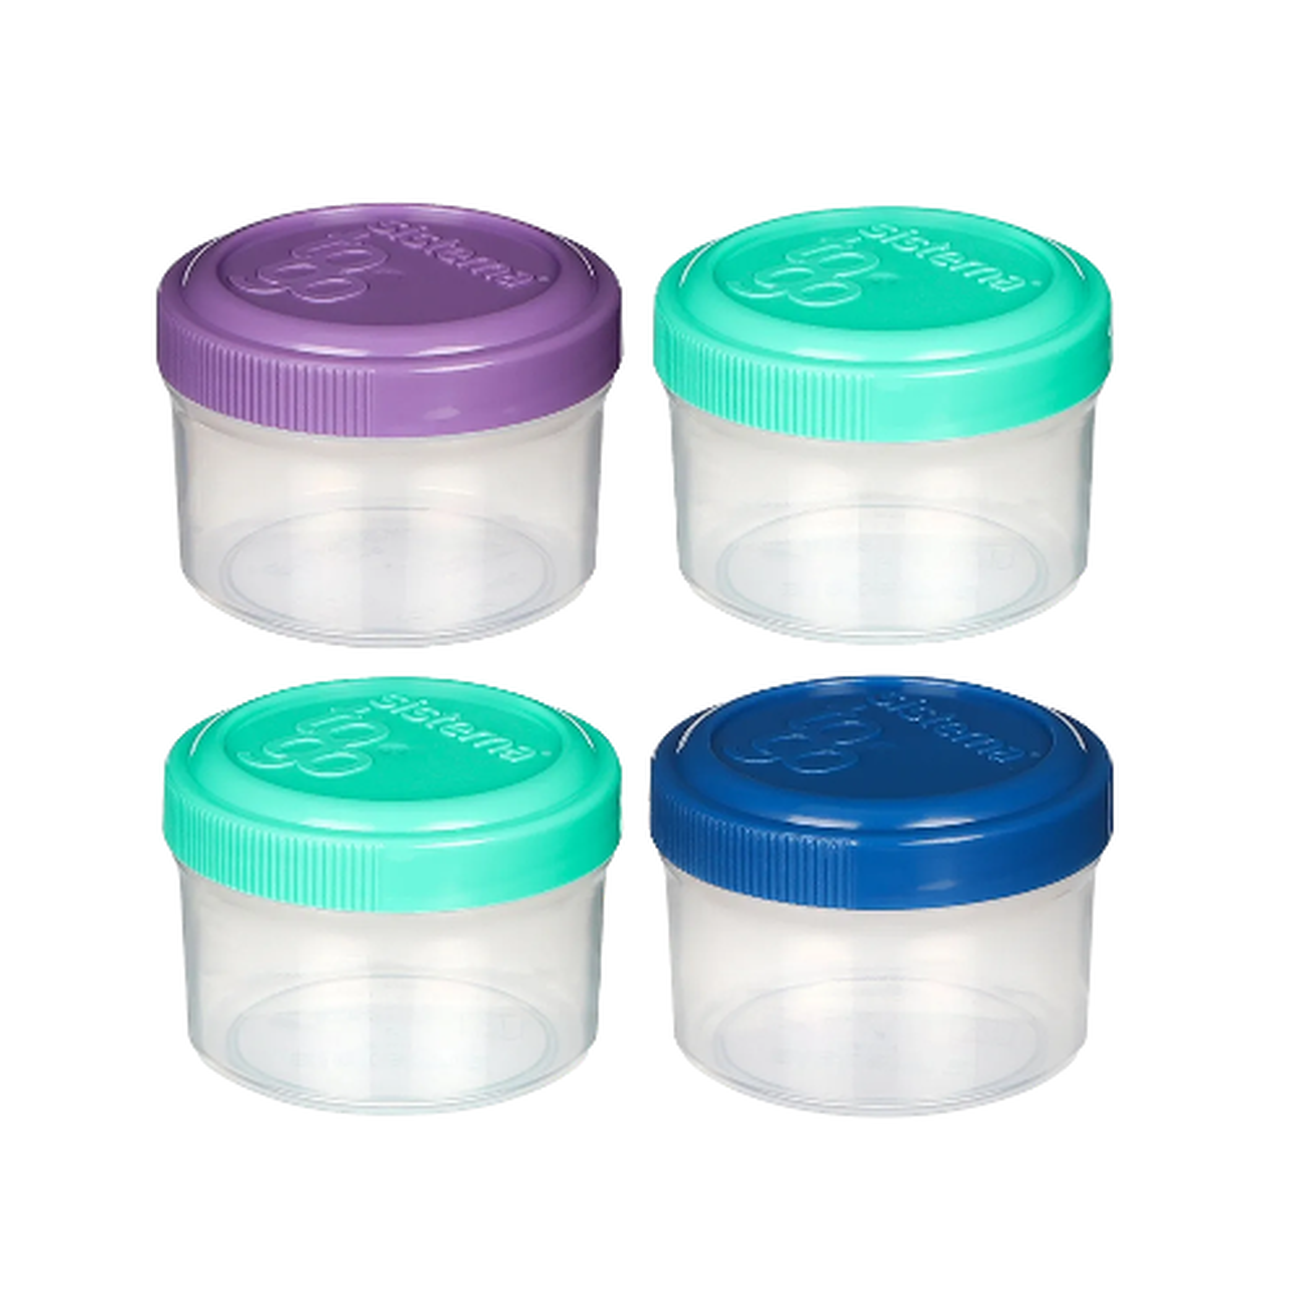 Sistema to Go Mini Knick Knack Pack Containers 4 PC